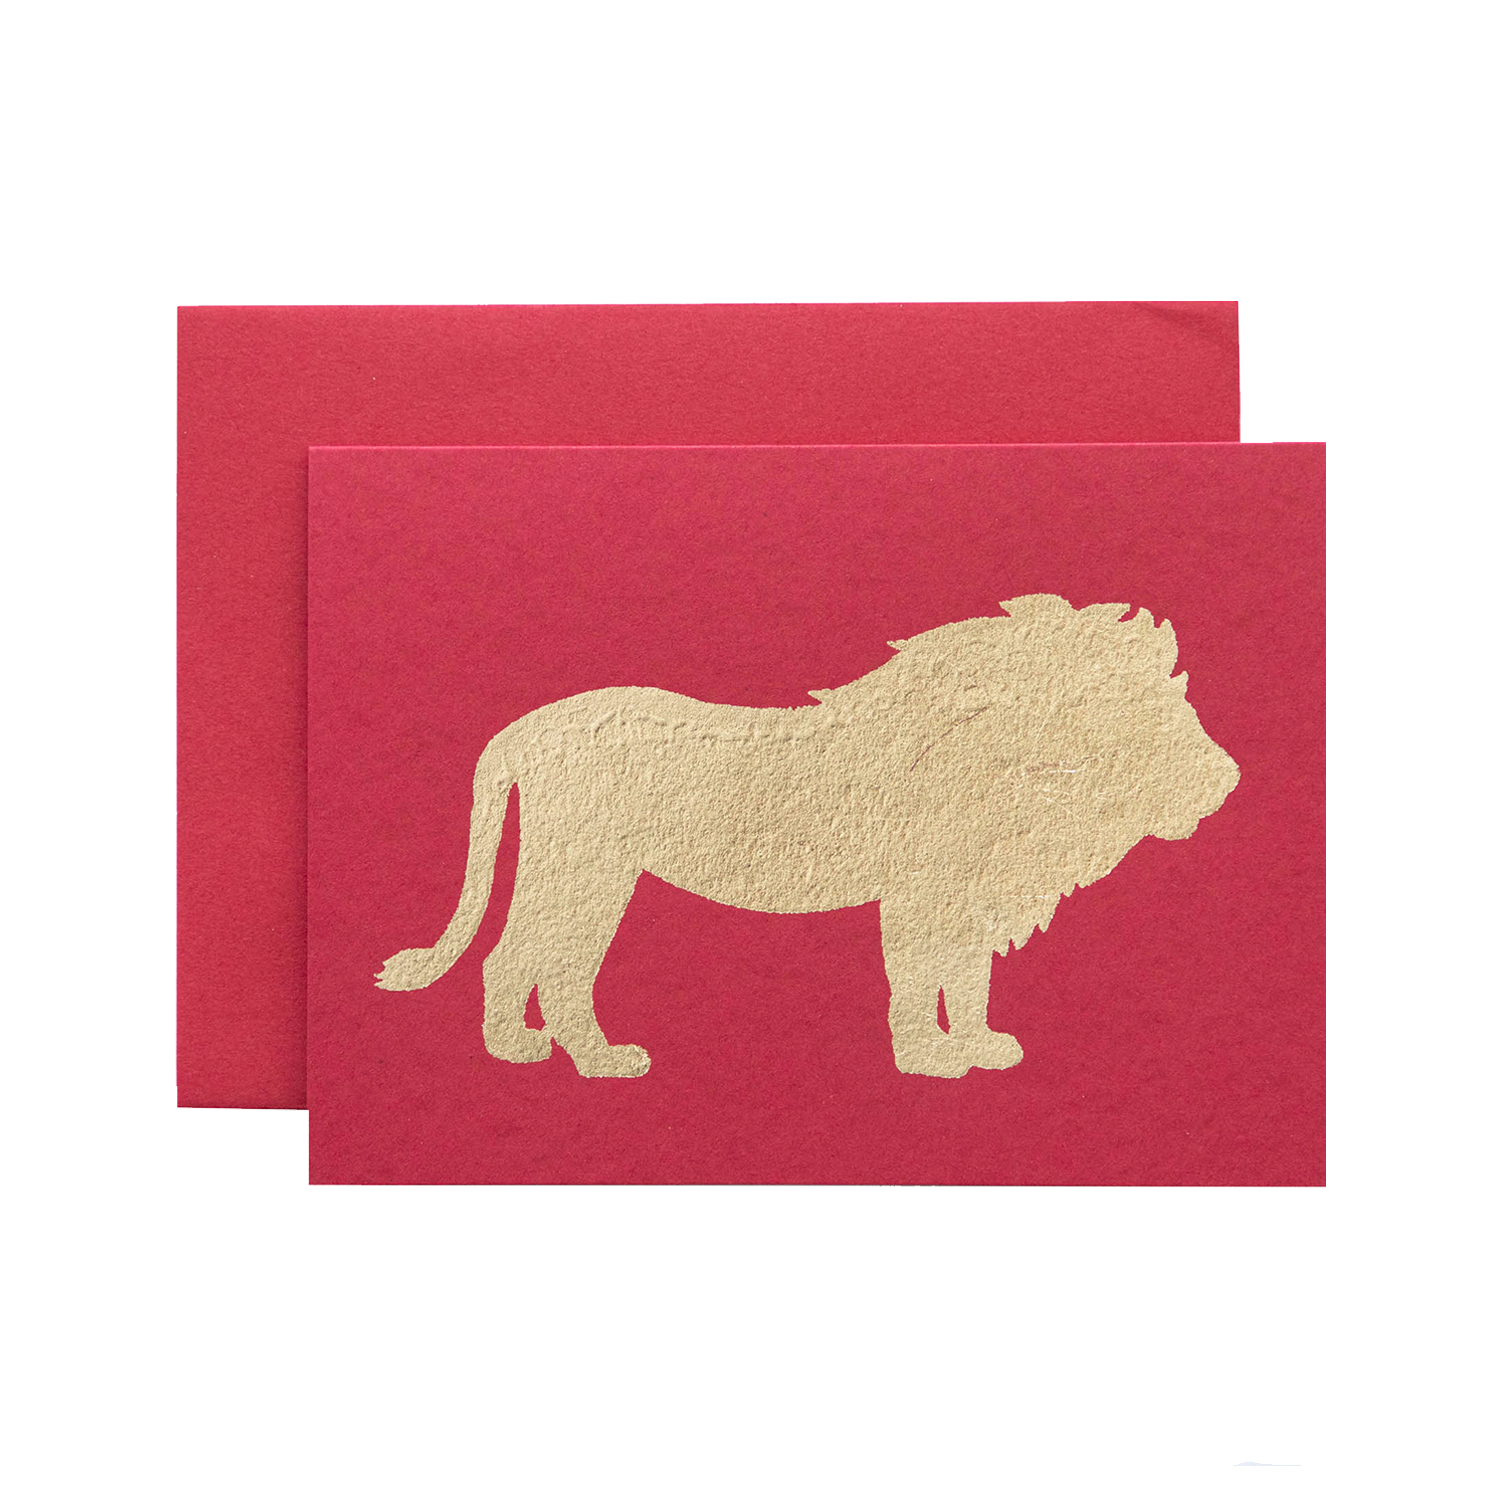 A Red Lion Card with a gold lion on it, handmade in the USA with a touch of gold leaf.